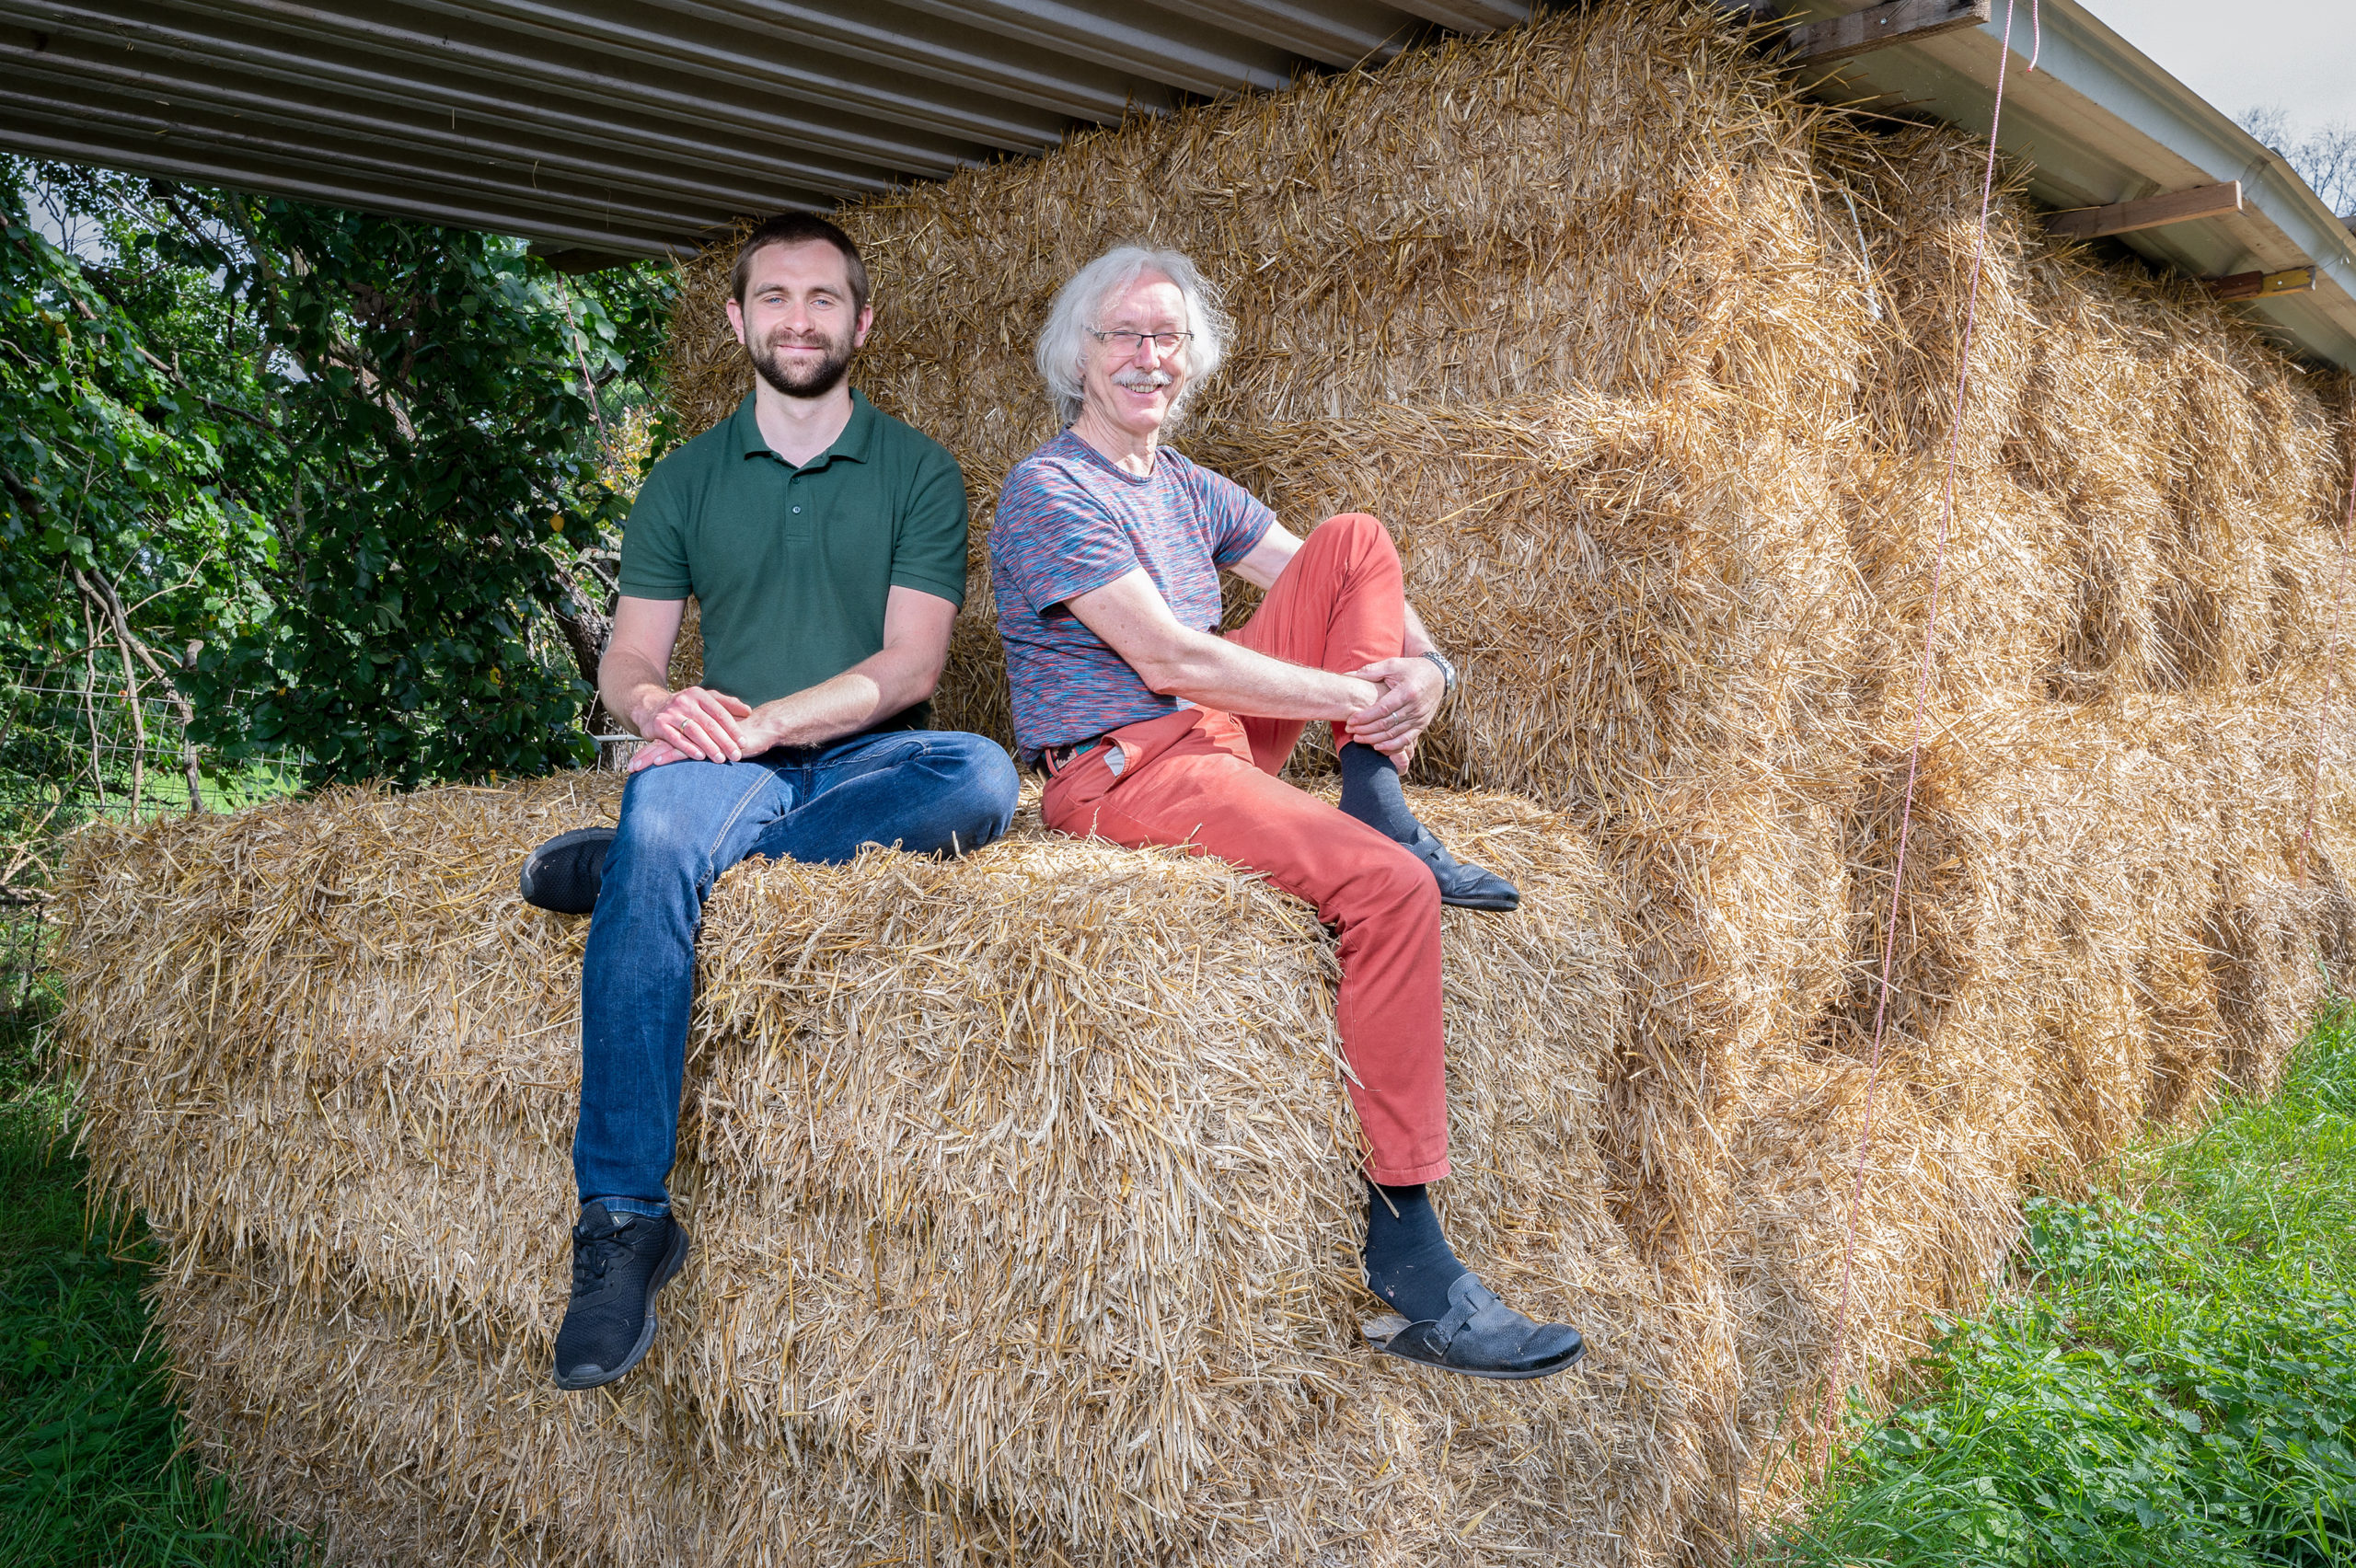 Read more about the article On the trail of straw bale construction: Werner Ehrich talks about the sustainable form of house construction.